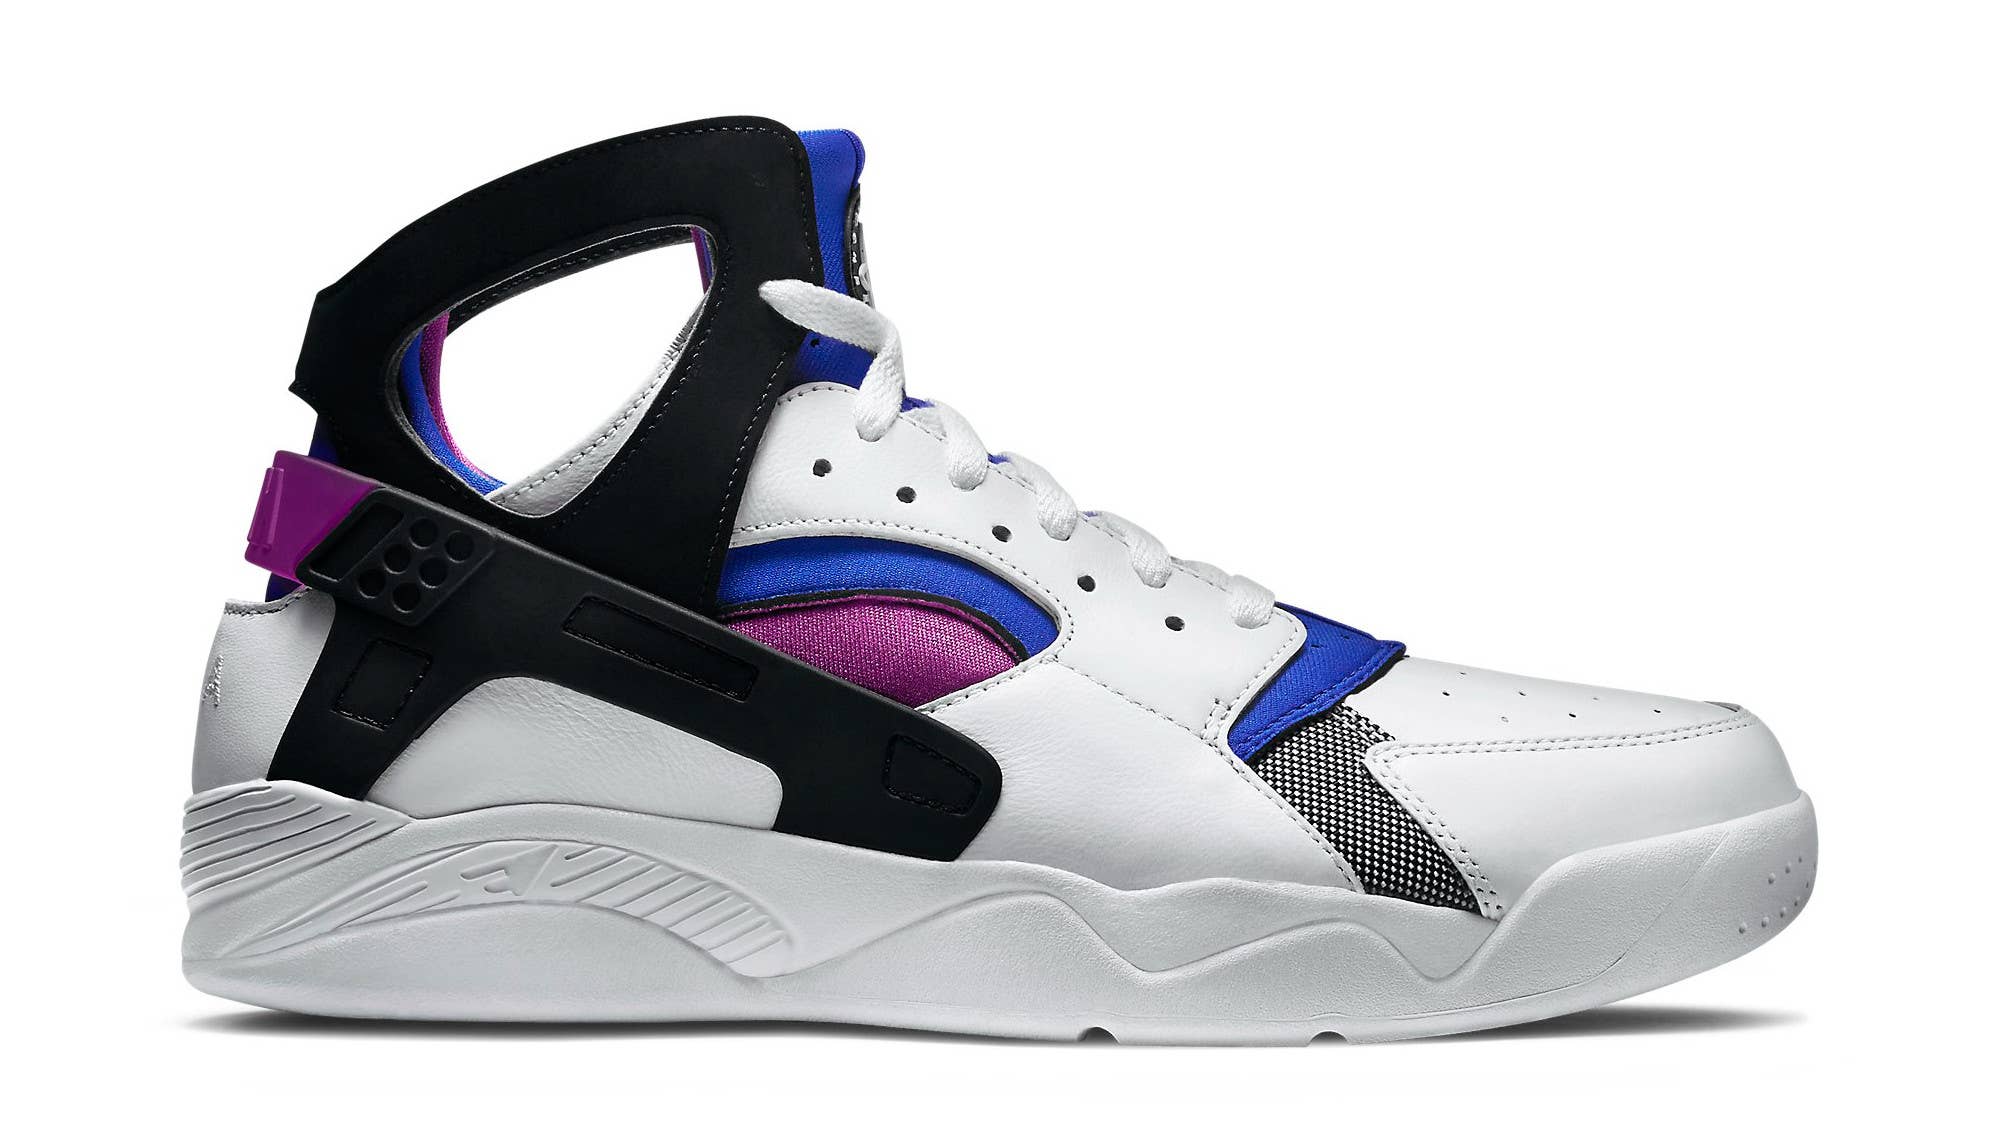 Latest Nike Air Huarache Trainer Releases & Next Drops